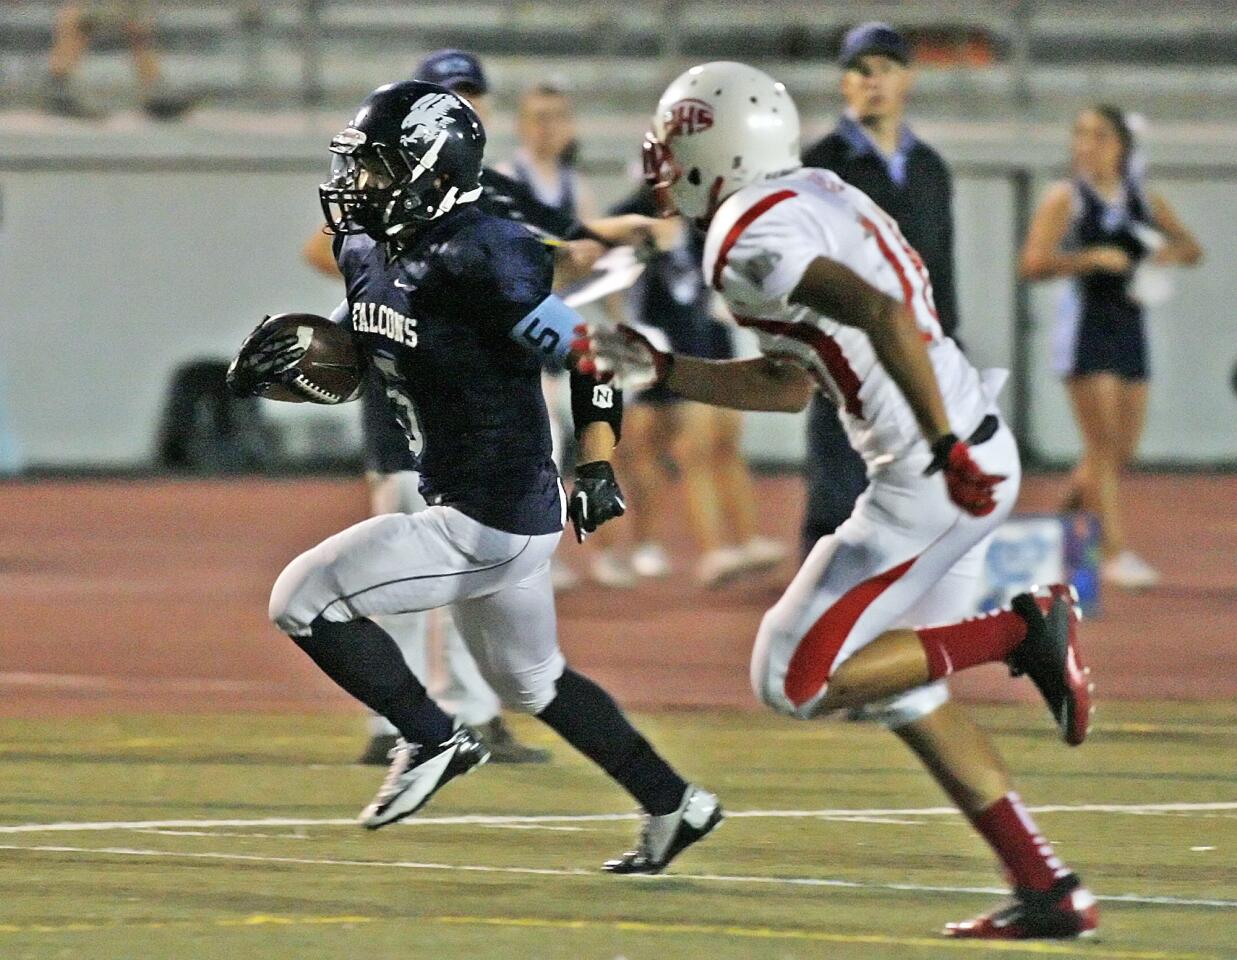 Crescenta Valley runningback William Wang out runs Pasadena's Andres Arias for a first quarter touchdown in a Pacific League football game at Glendale High School on Friday, September 28, 2012.